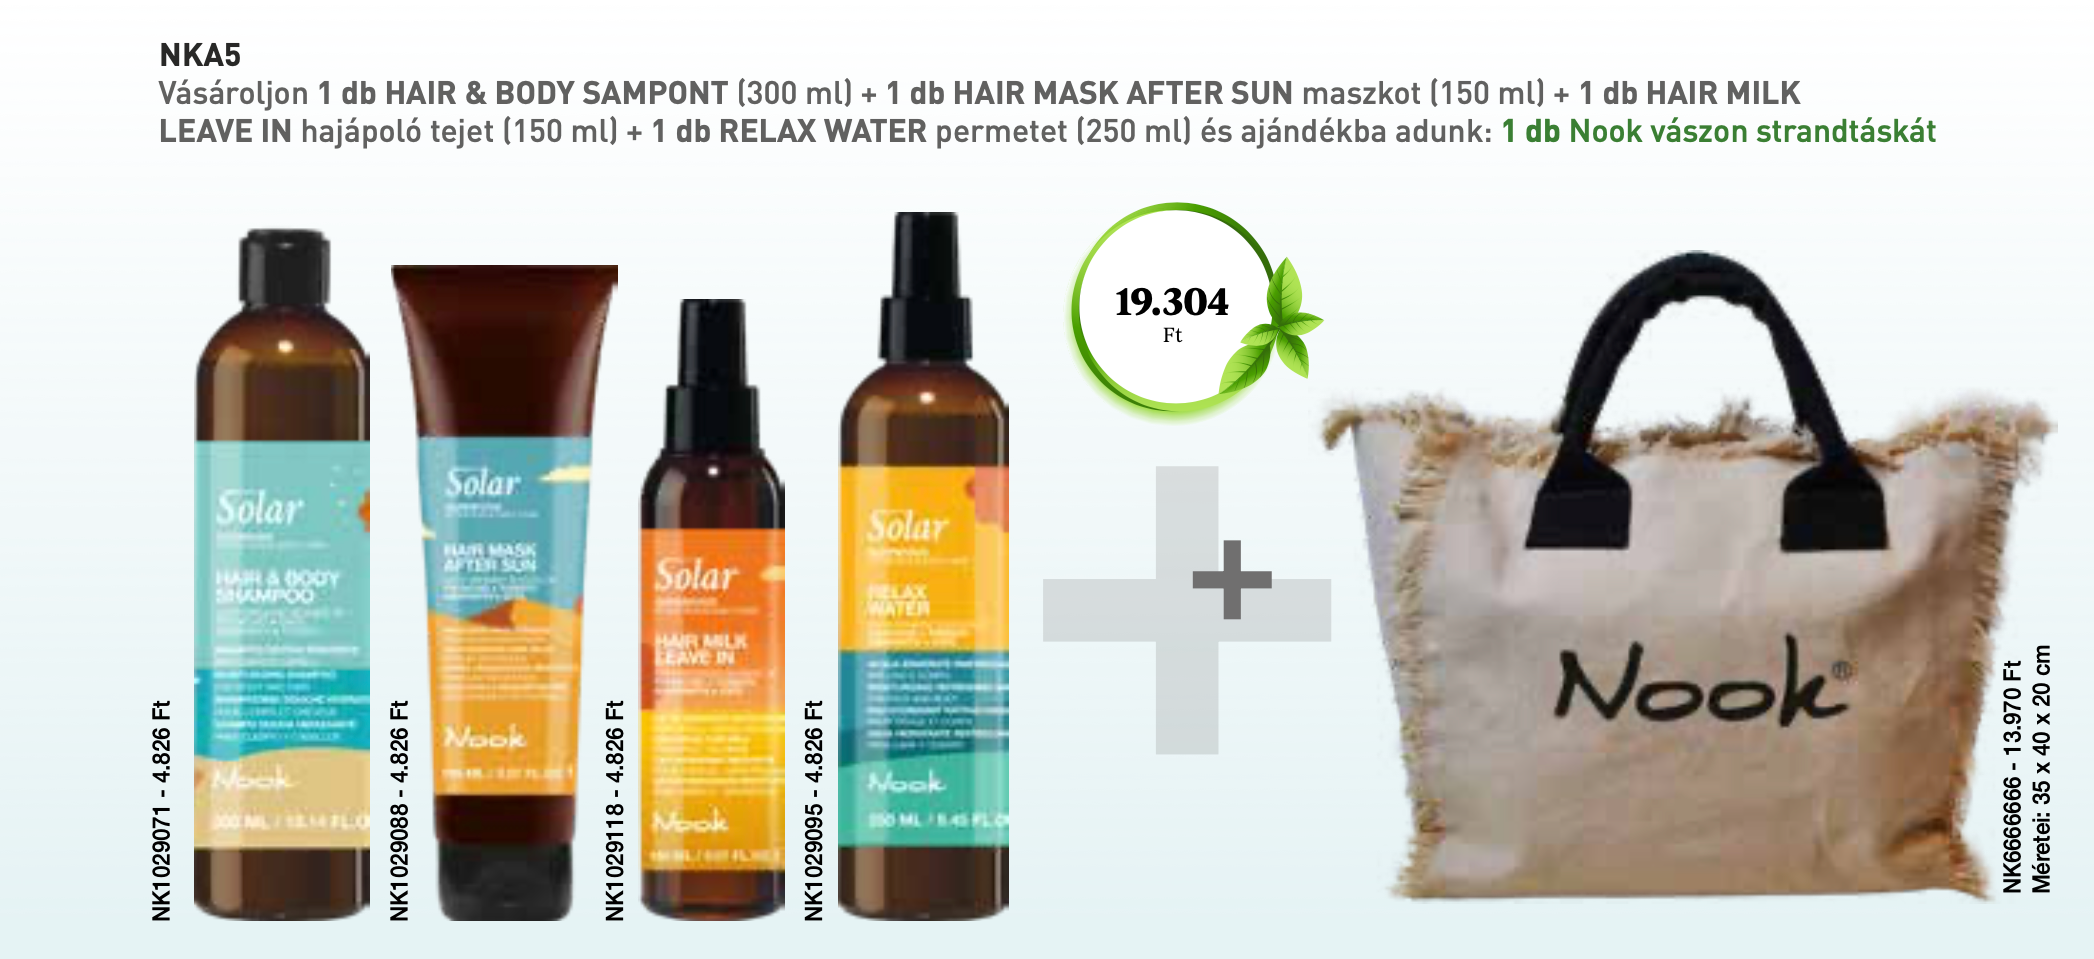 NKA5 NOOK SOLAR SUPERFOOD After Sun & Daily Care 4+1 AKCIÓ